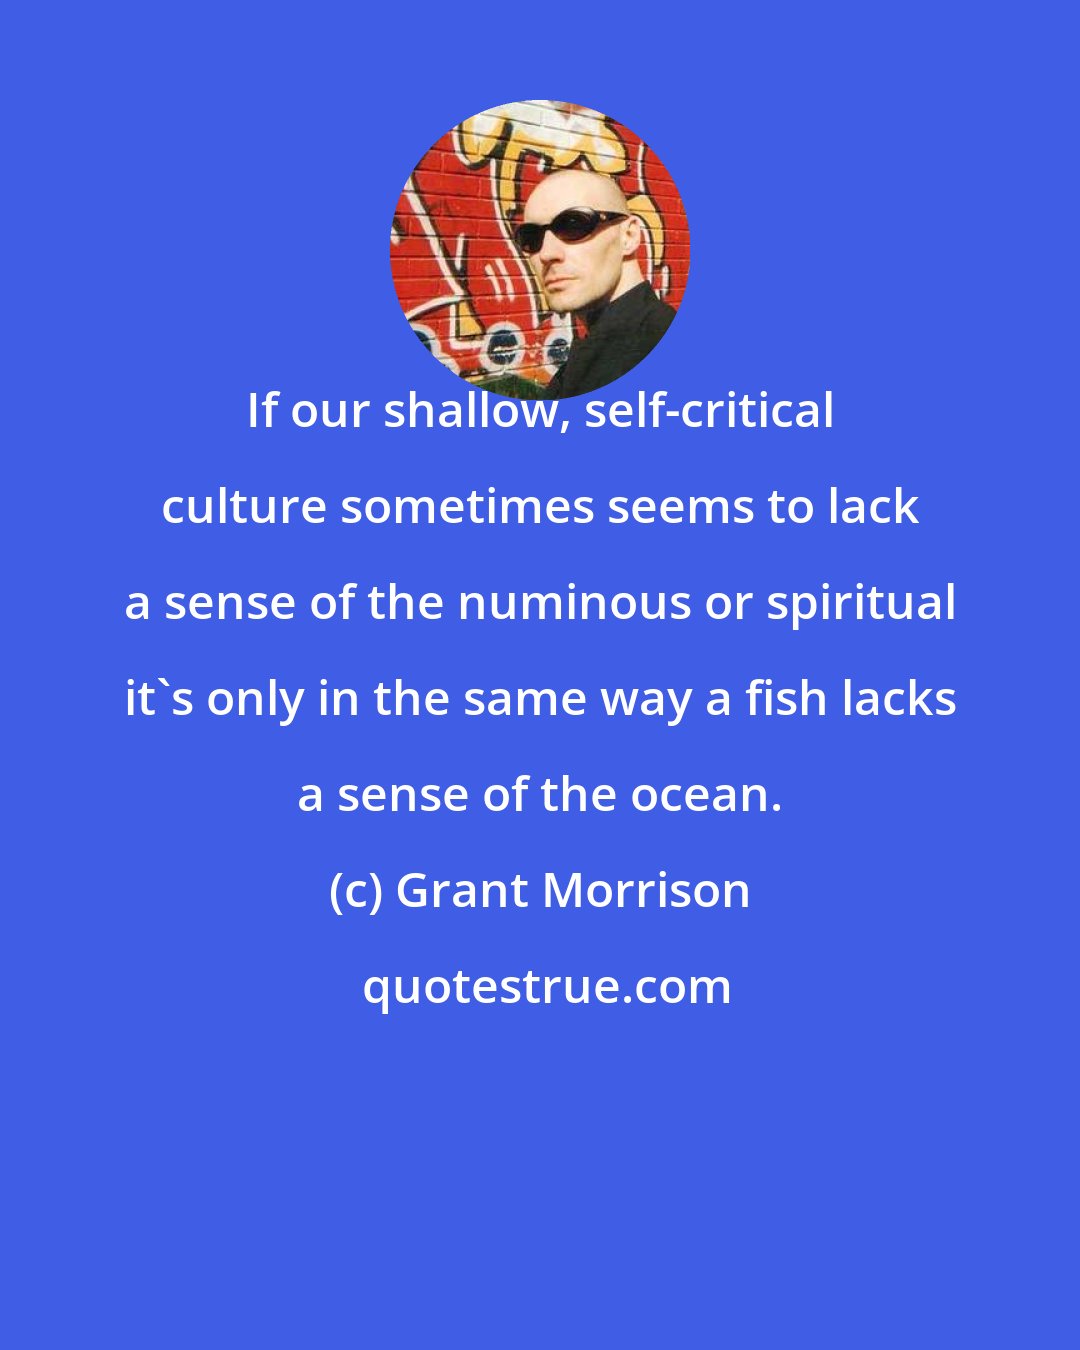 Grant Morrison: If our shallow, self-critical culture sometimes seems to lack a sense of the numinous or spiritual it's only in the same way a fish lacks a sense of the ocean.